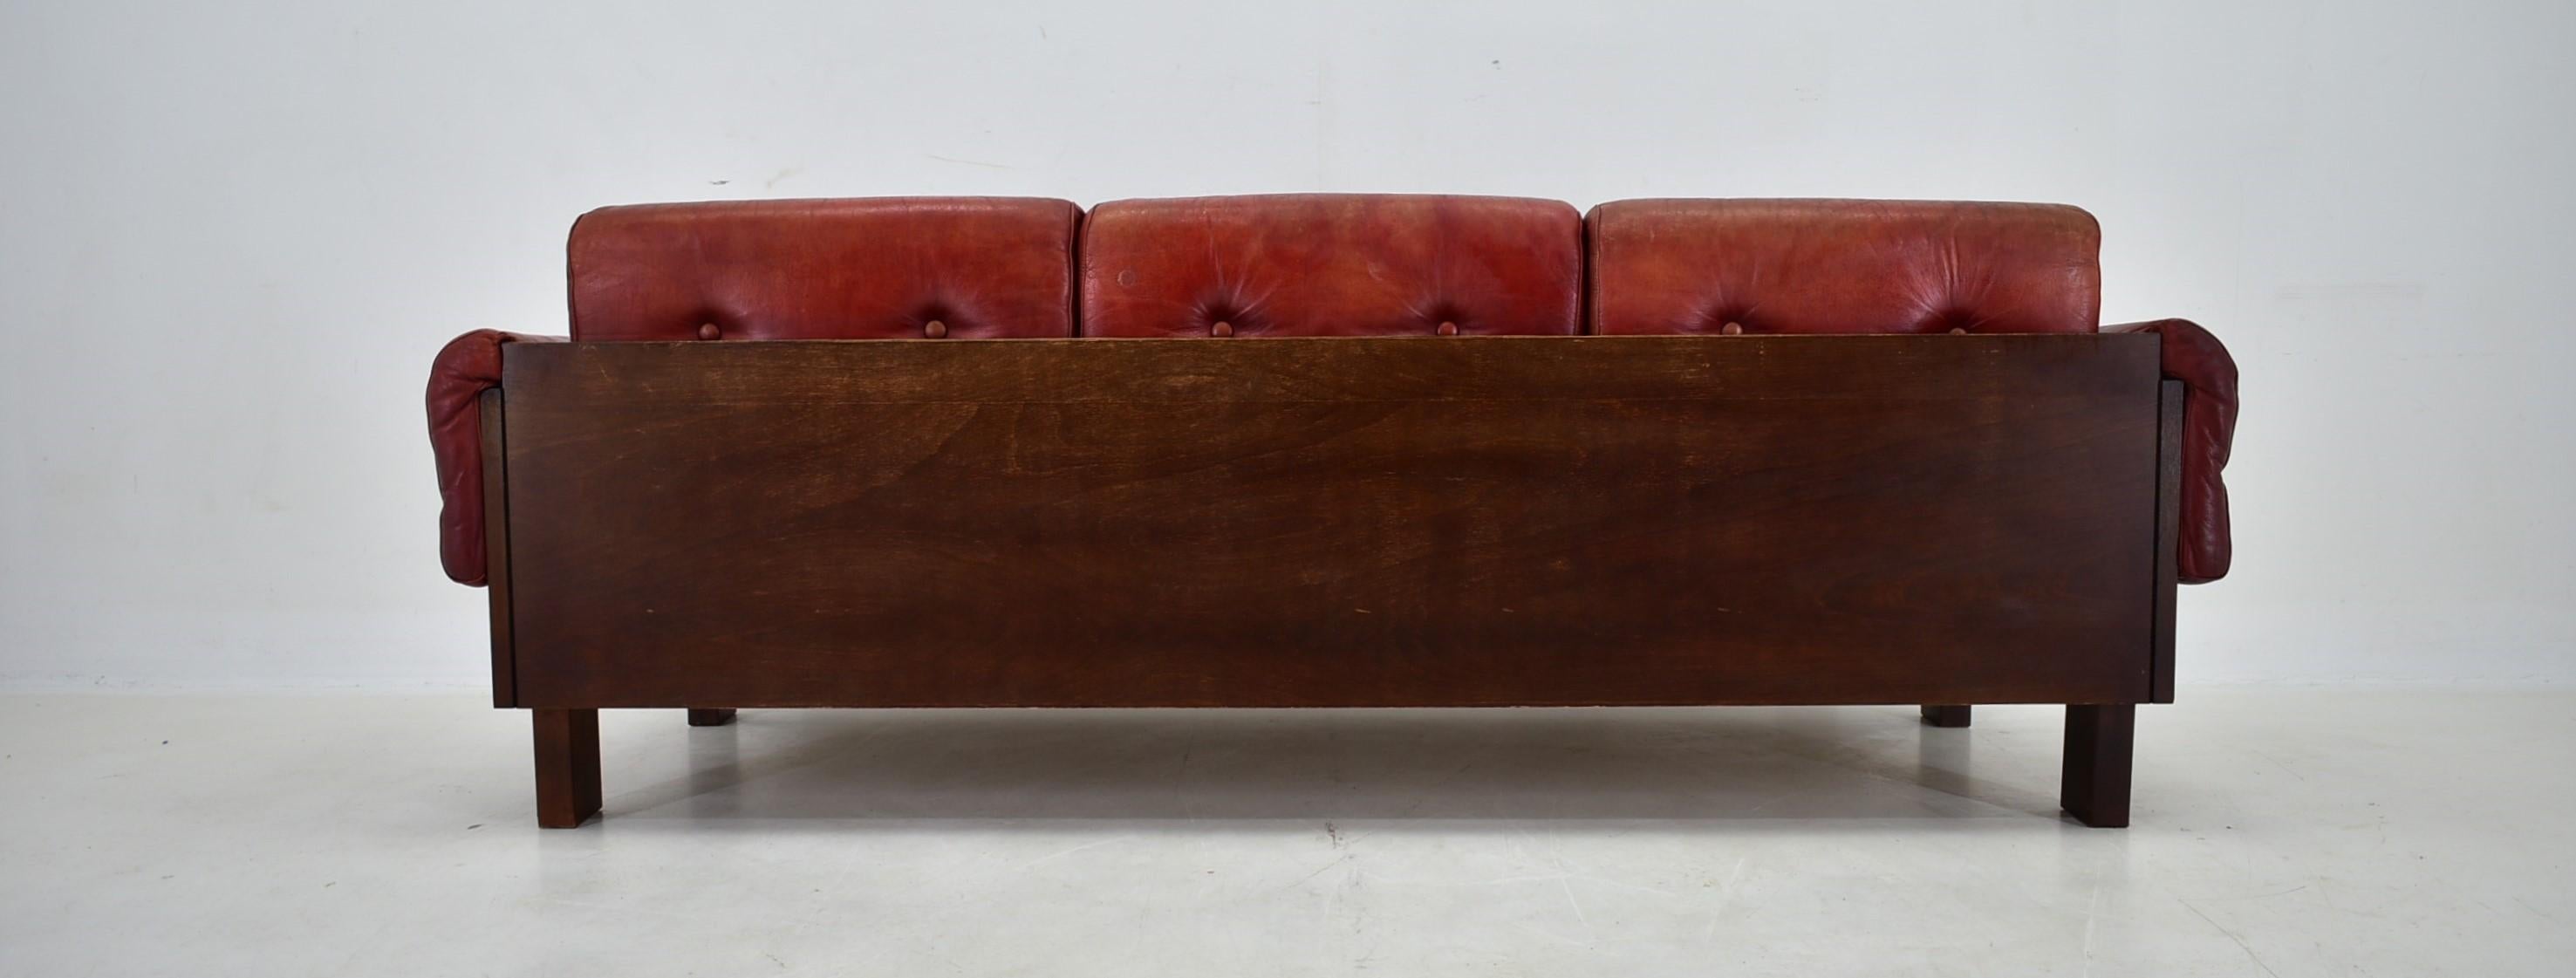 1970s Red Leather 3-Seater Sofa, Finland For Sale 8